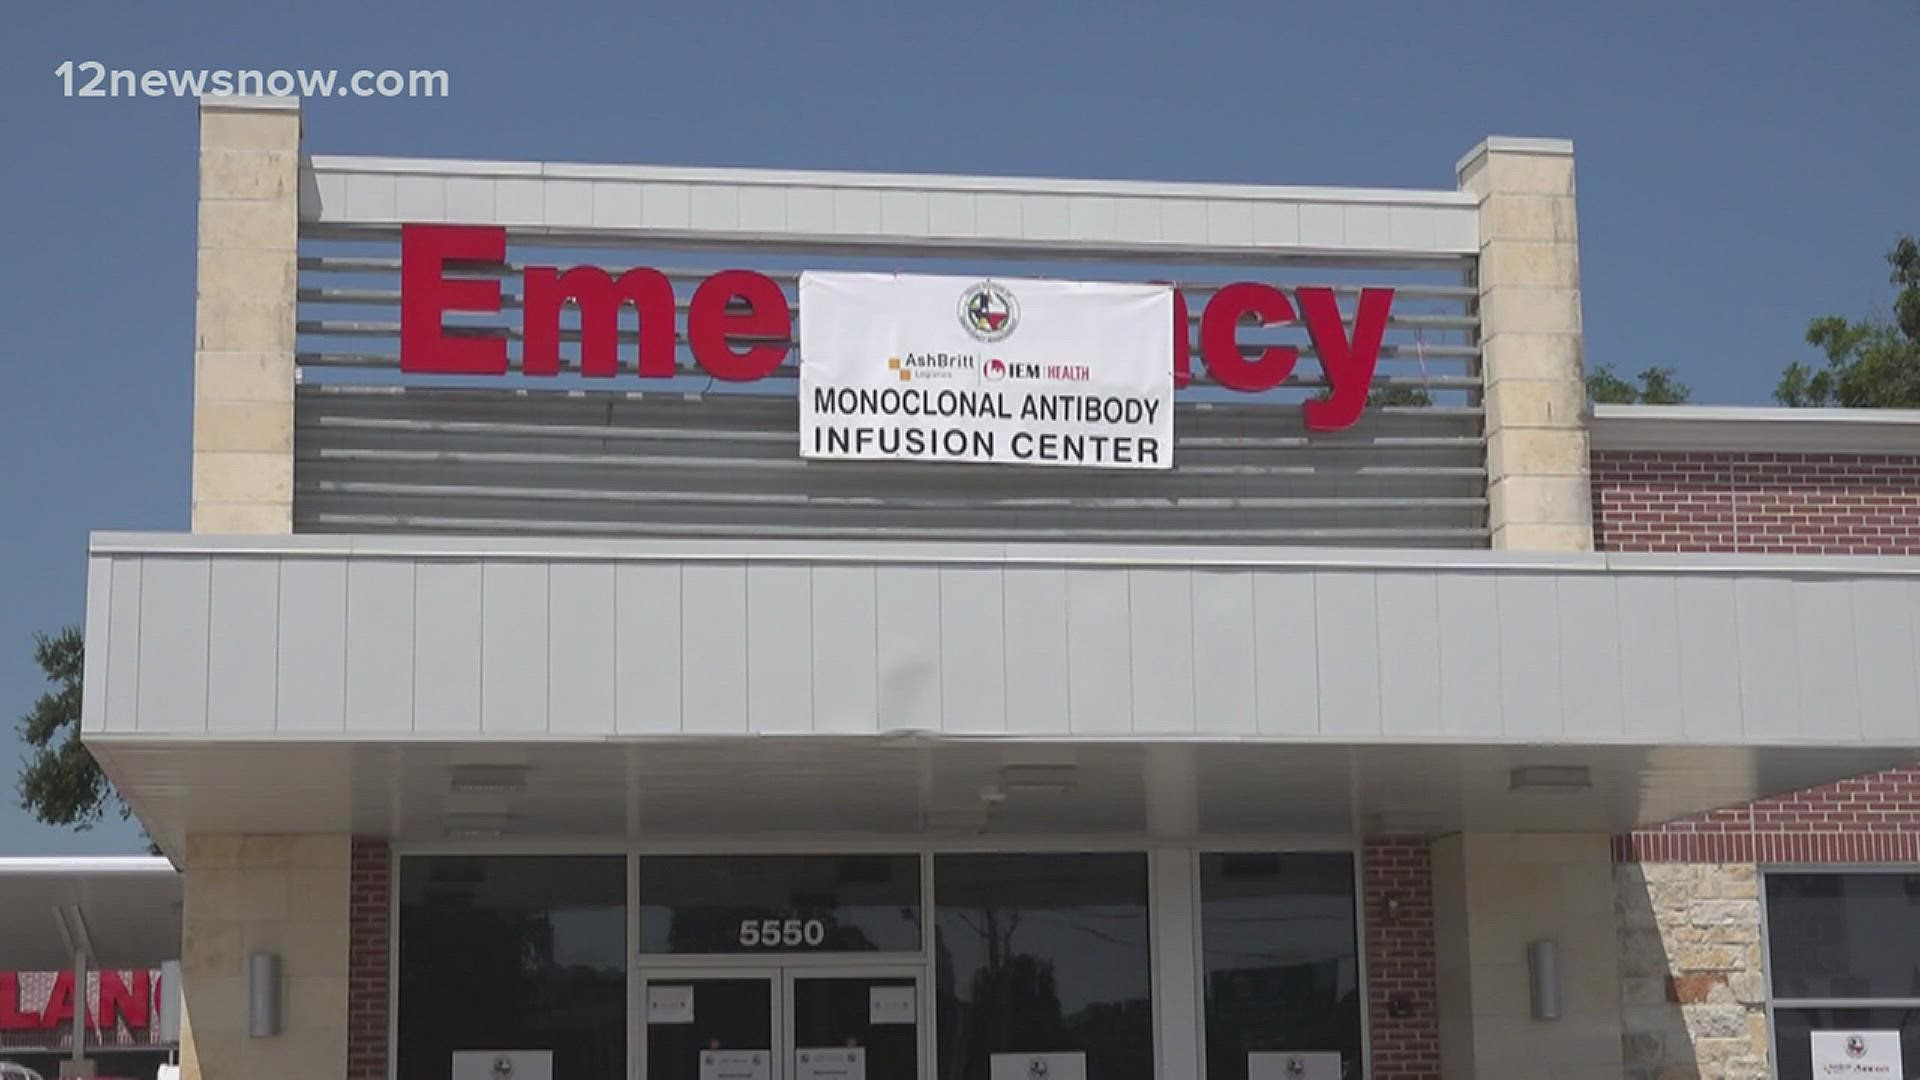 Southeast Texas leaders say a major resource that could keep people out of the hospitals is the regional infusion center.